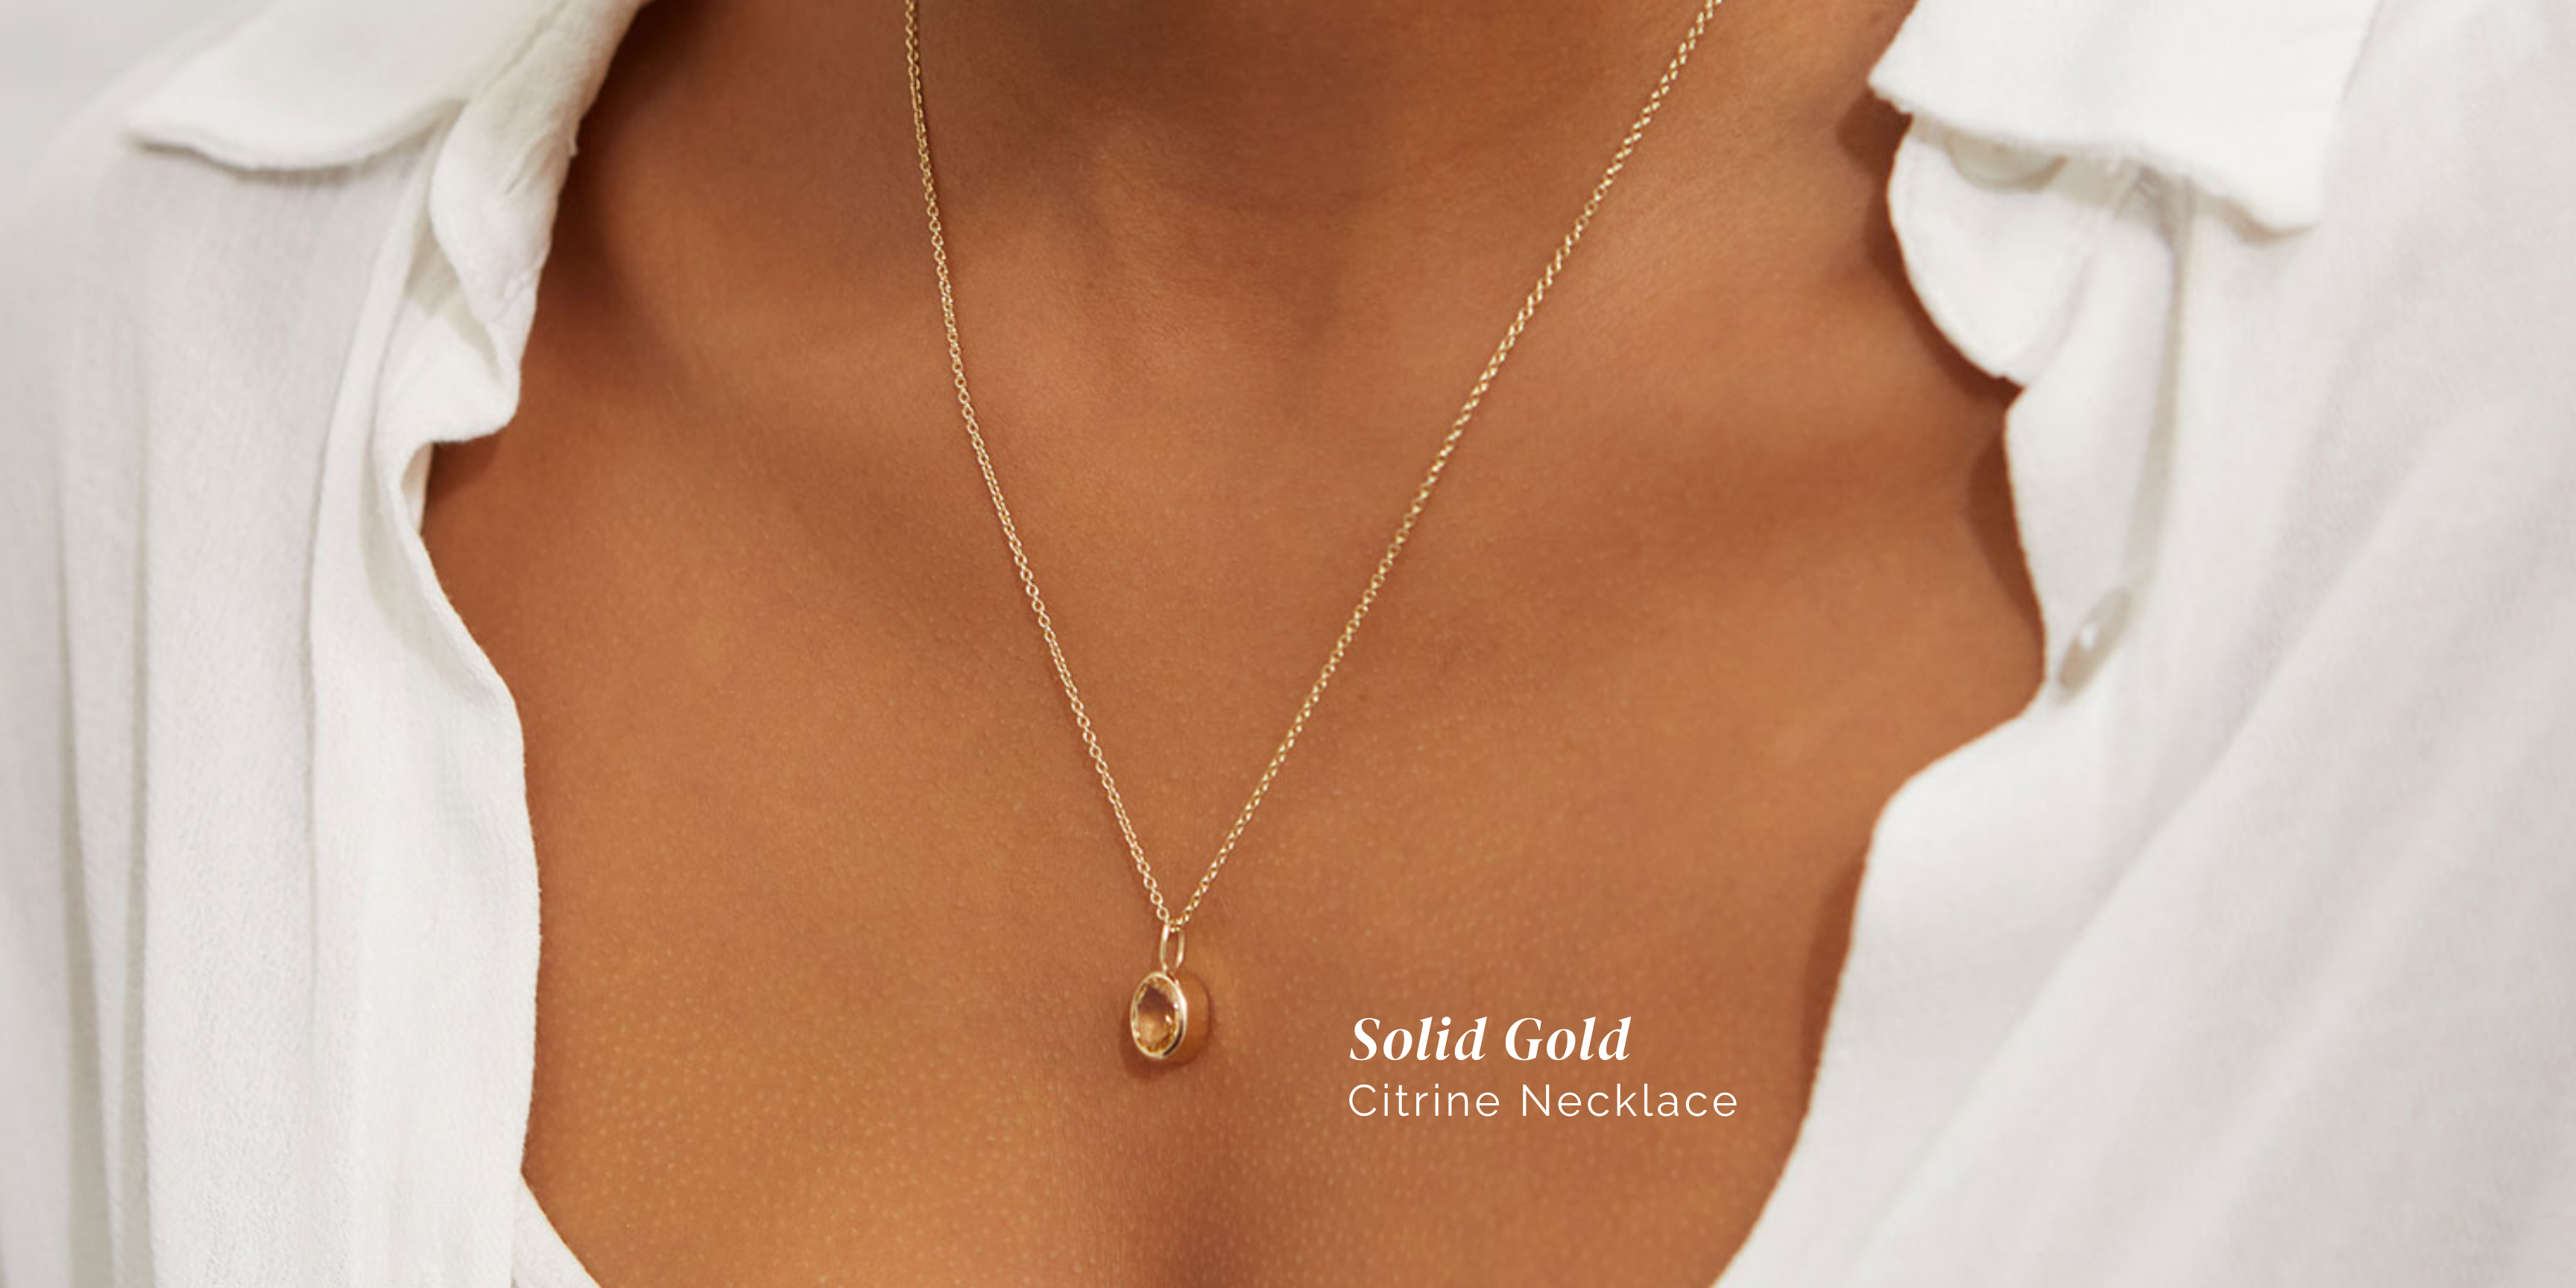 citrine solid gold necklace by maya magal london